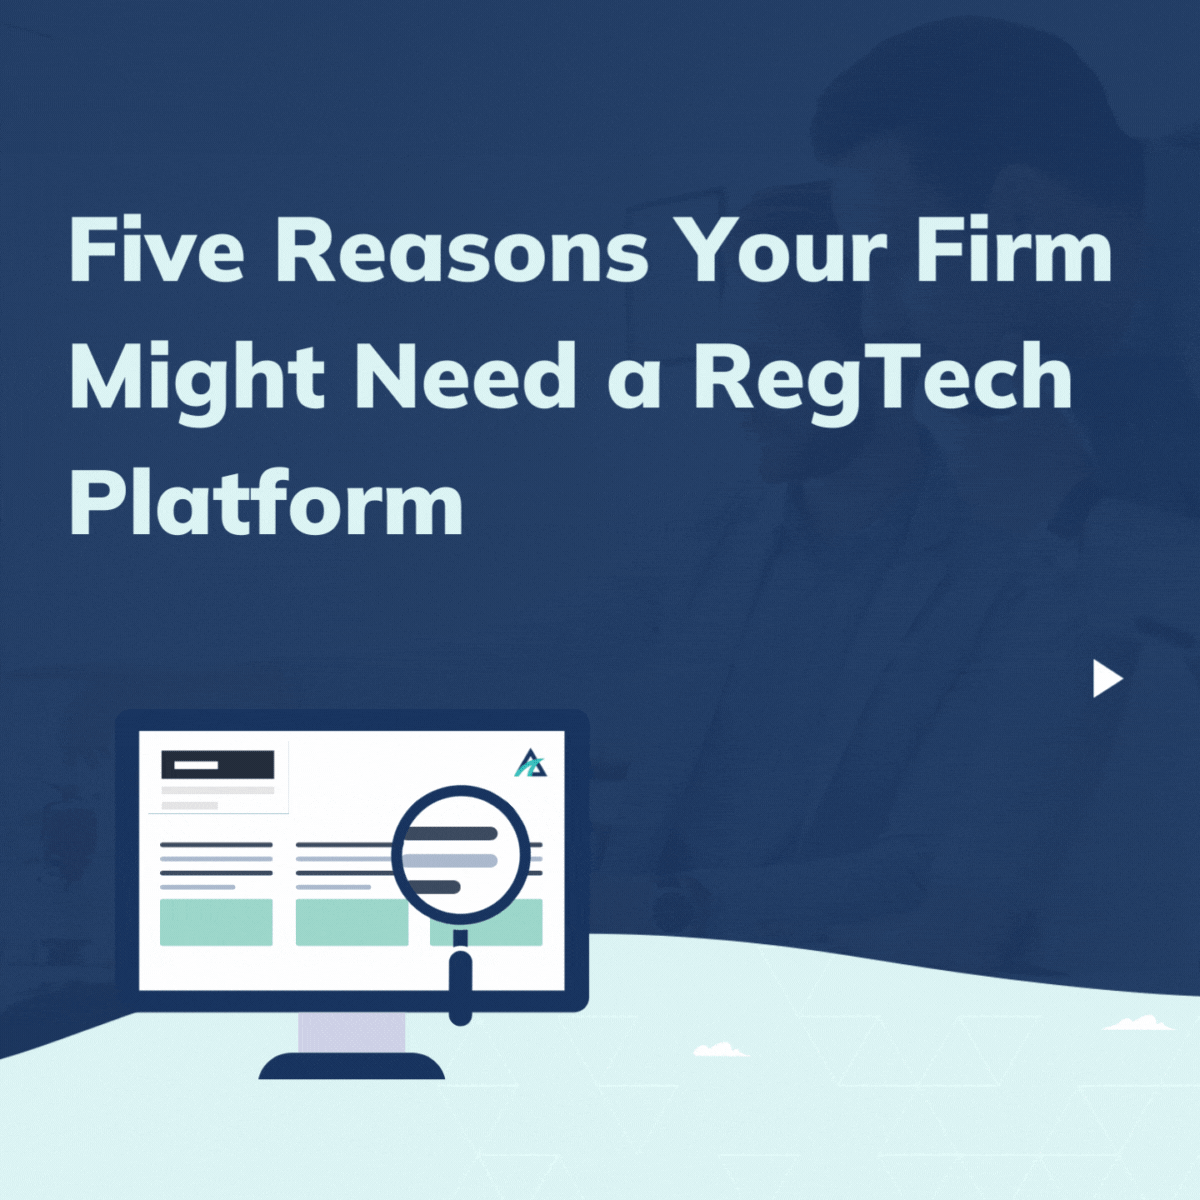 Investment Advisors: How to Know a RegTech Solution Will Work for Your Firm